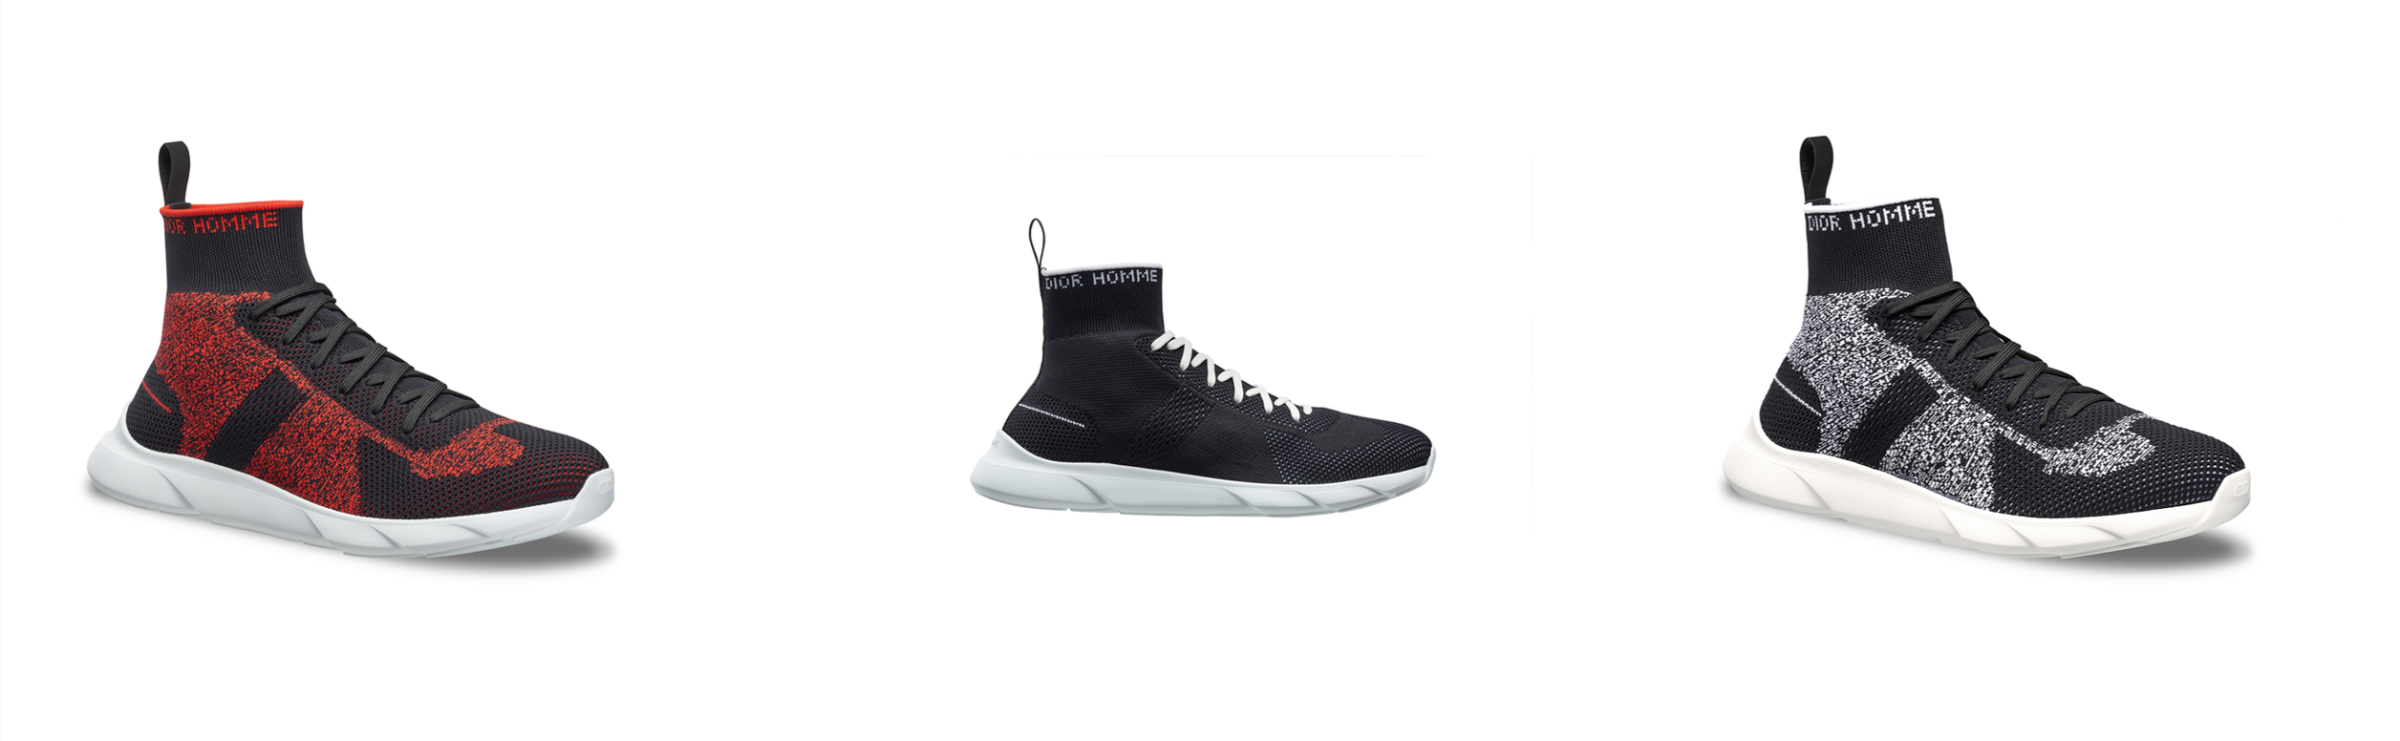 Dior Homme B21 Sneakers - BagAddicts 